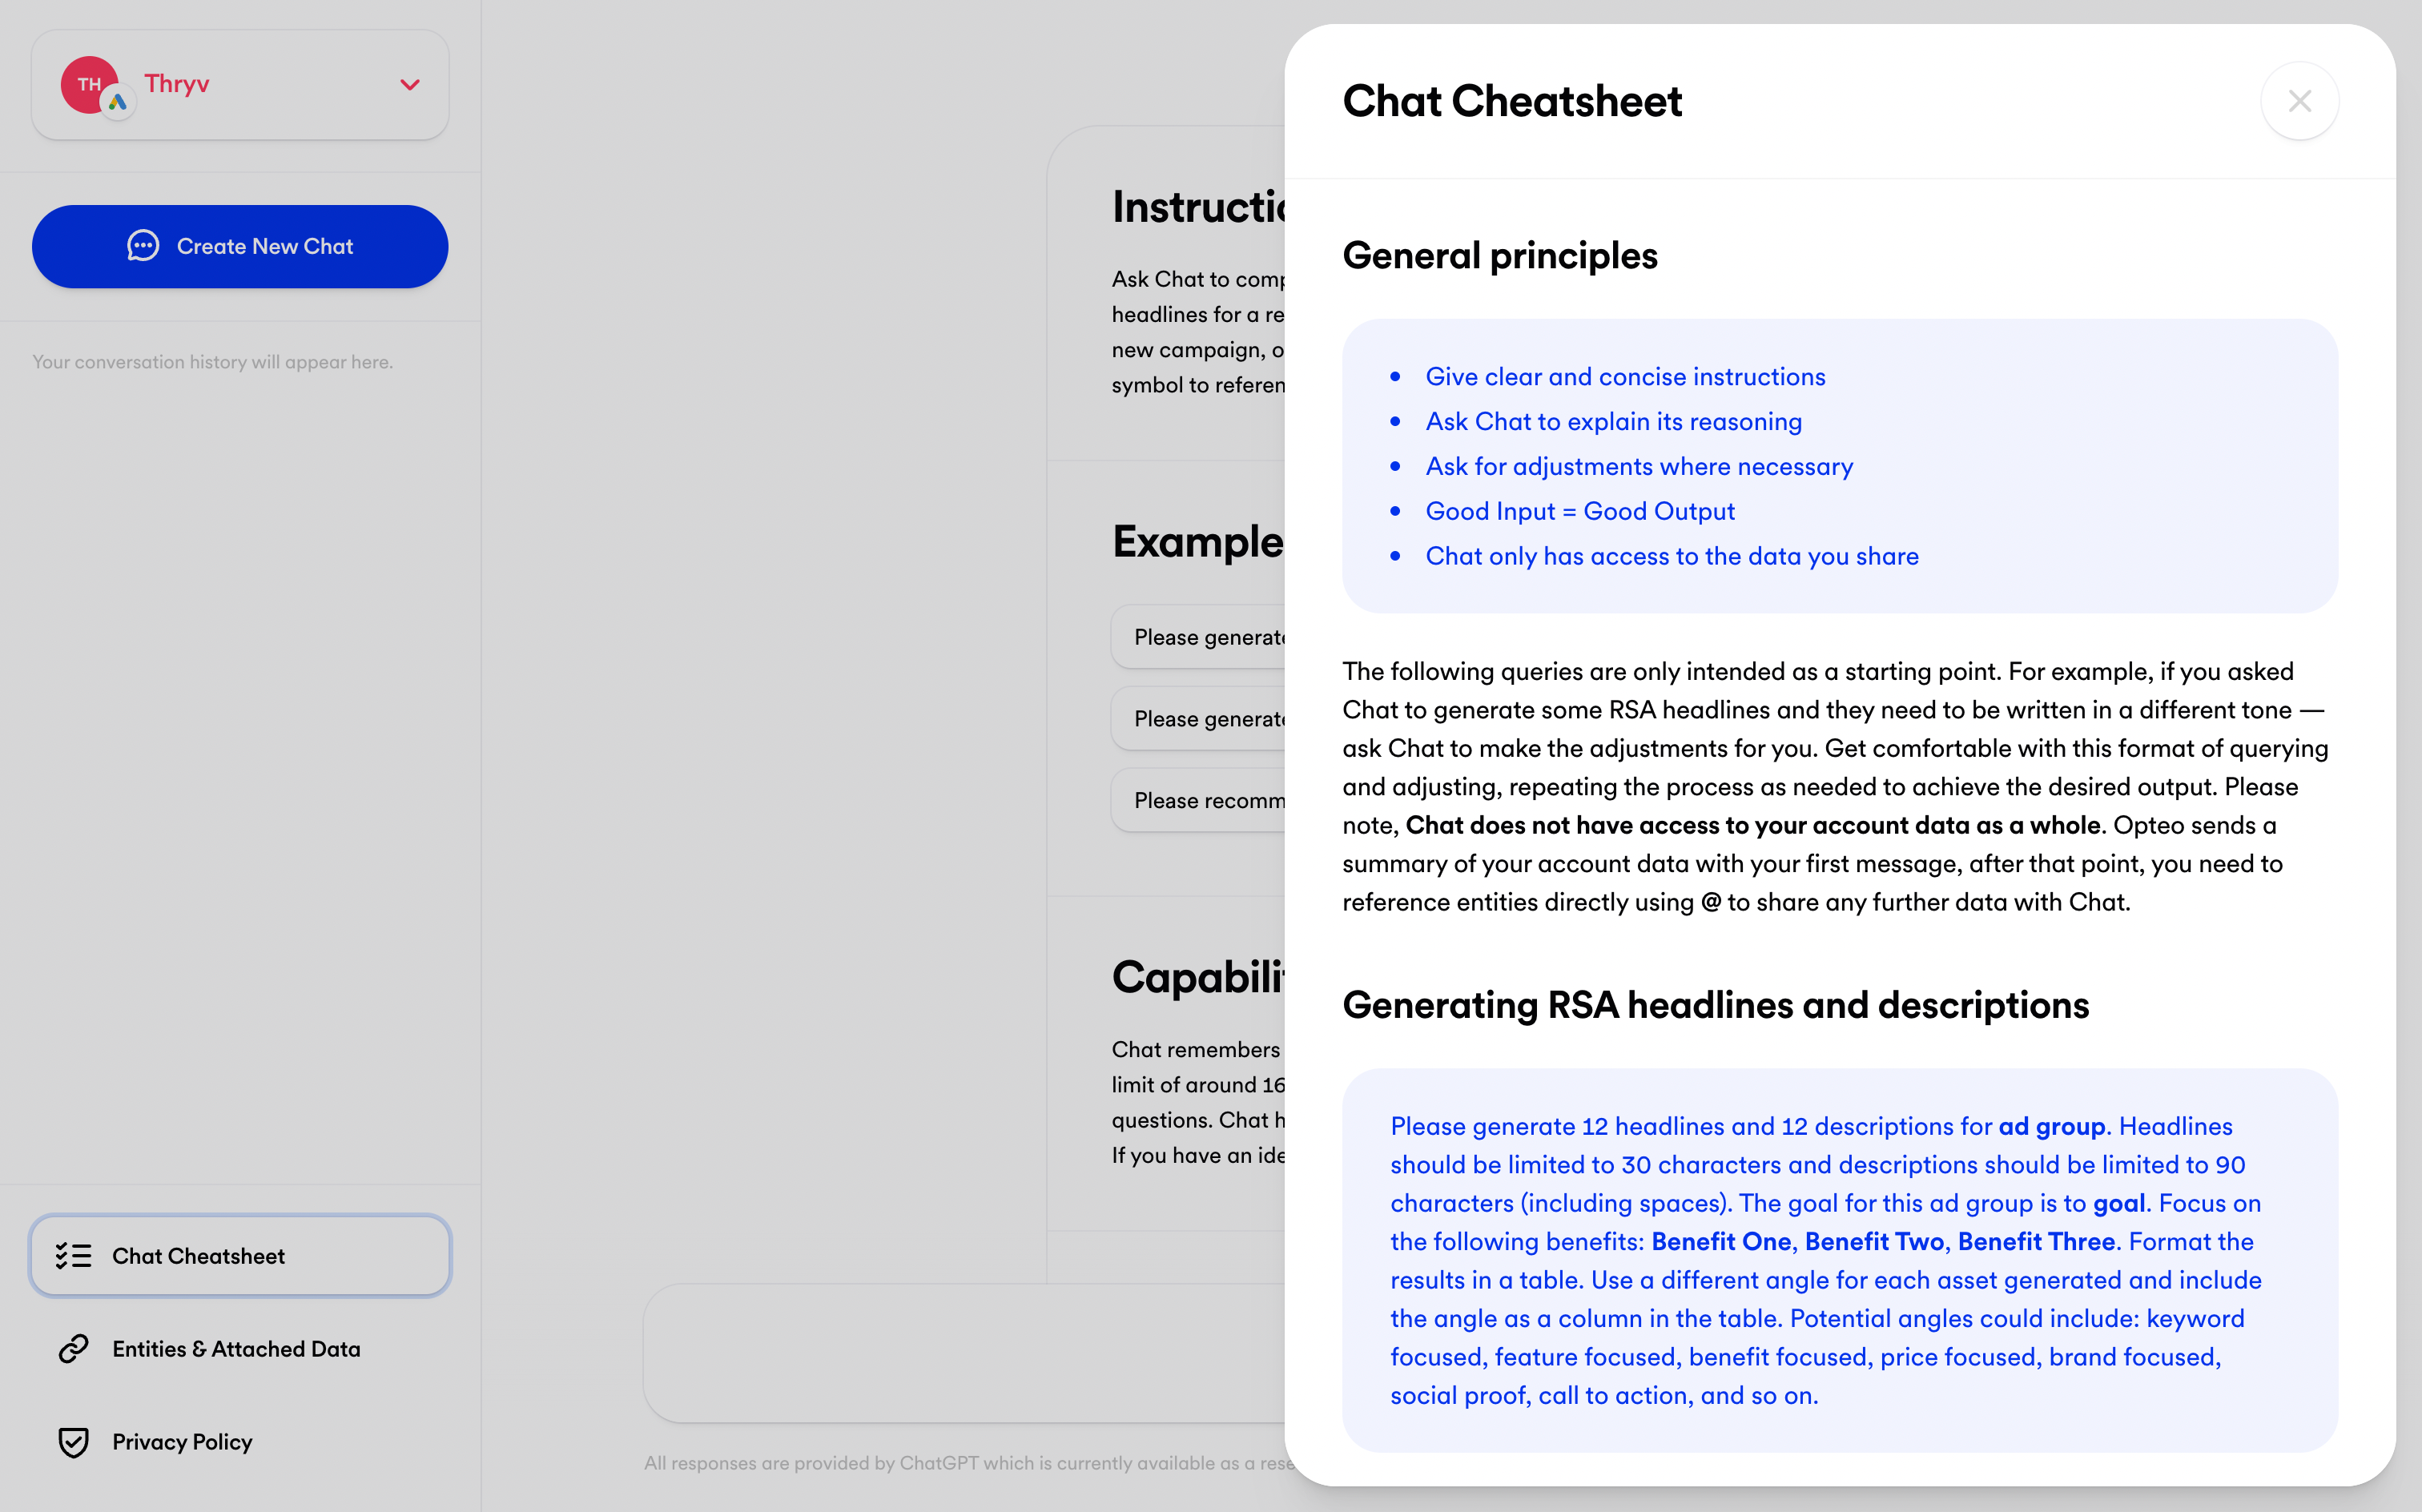 Screenshot of the "Chat Cheatsheet" in Opteo's Chat feature